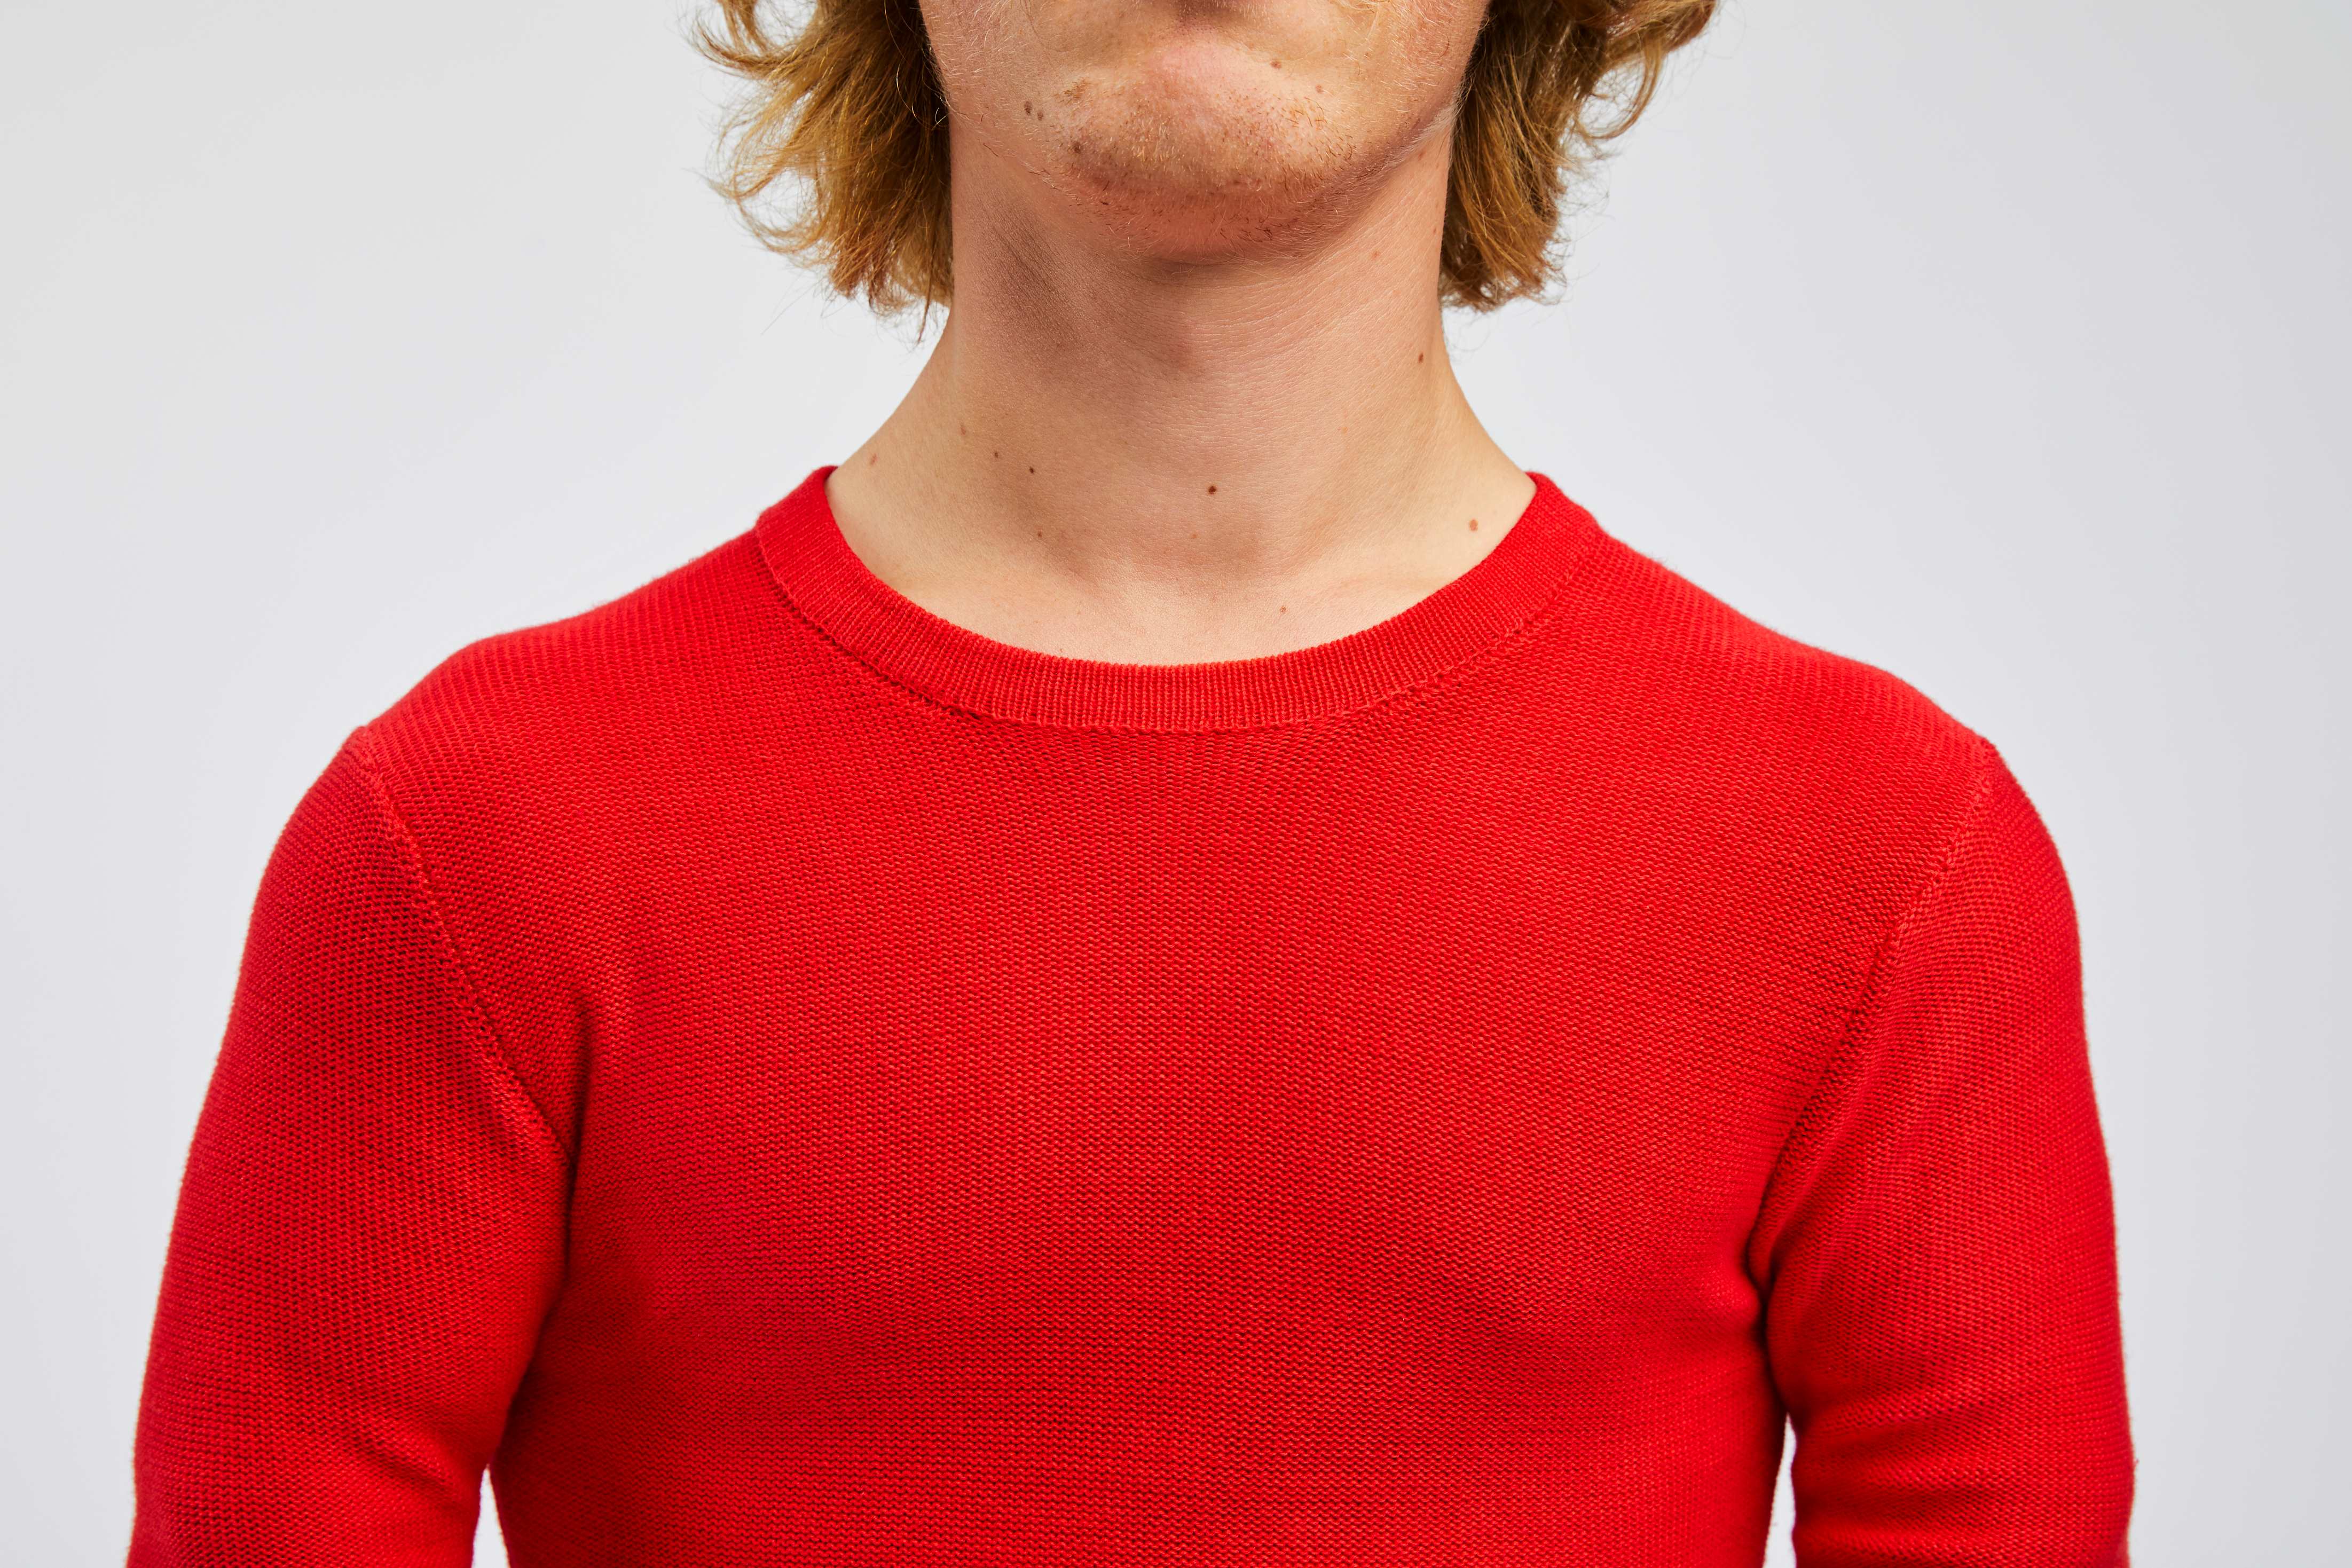 detailed view of red pullovers collar